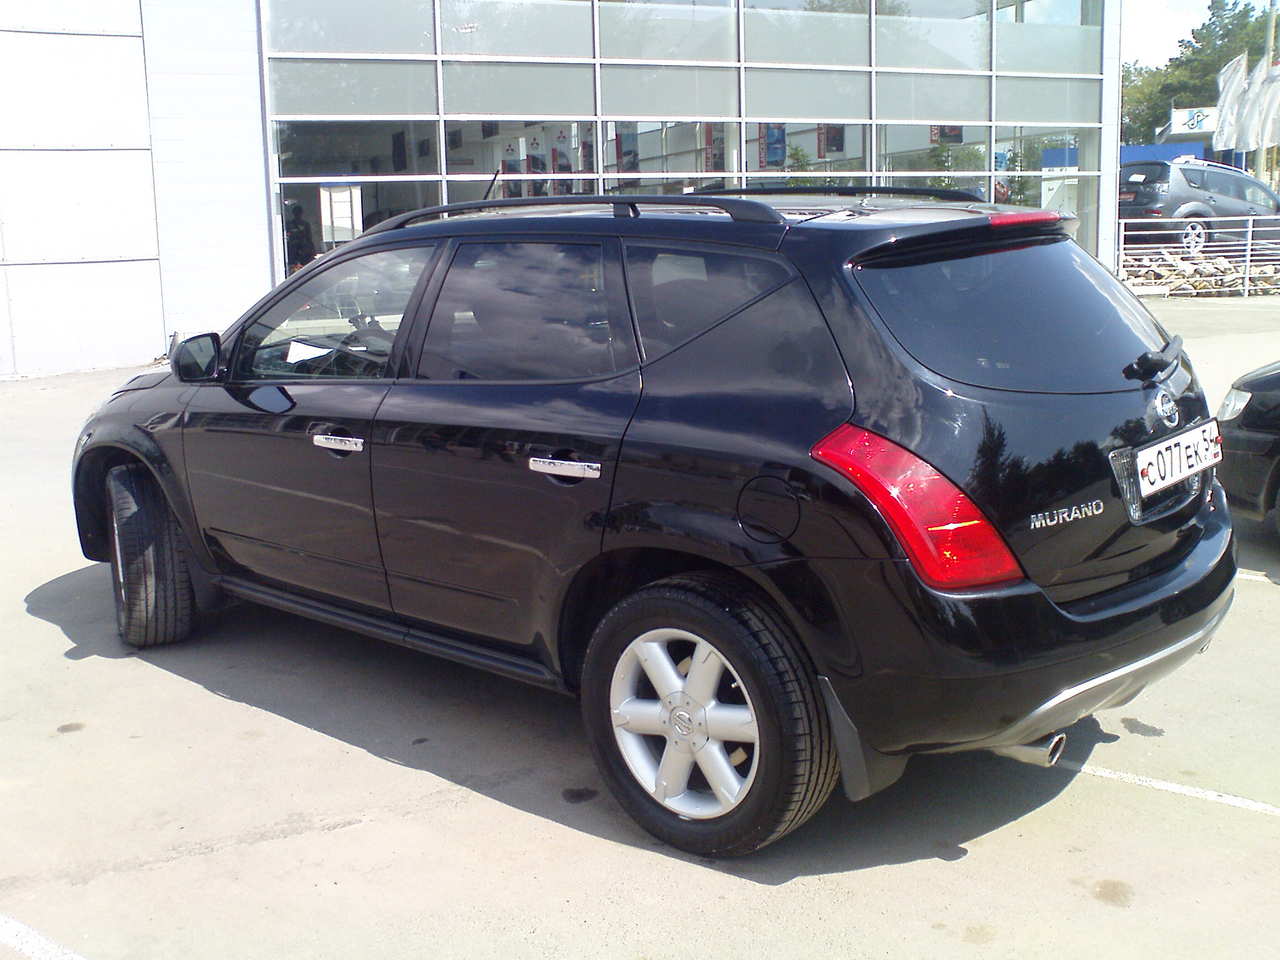 2002 Nissan murano pictures #6